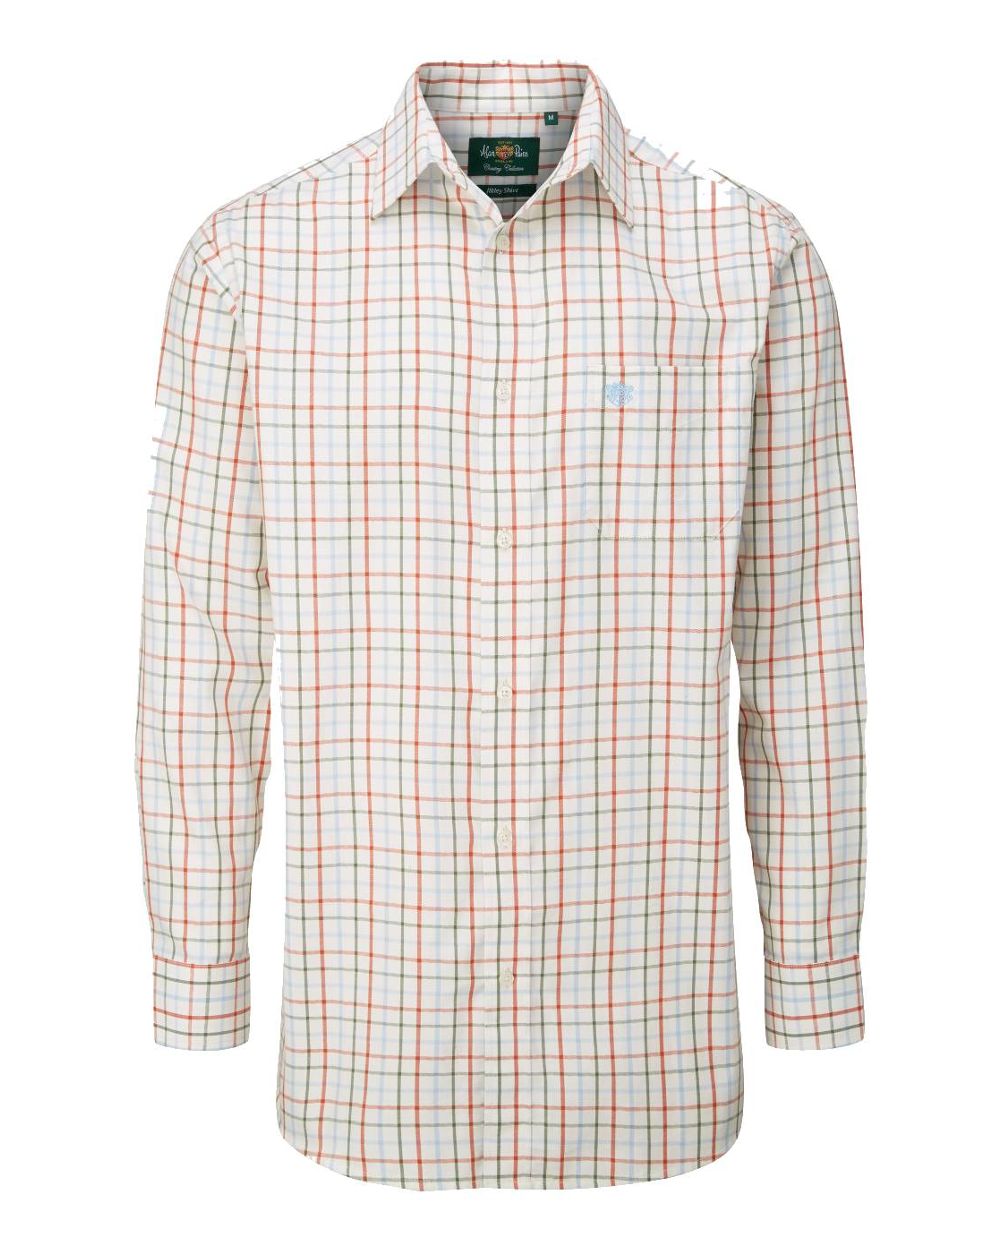 Alan Paine Ilkley Shirt in Red/Blue Check 